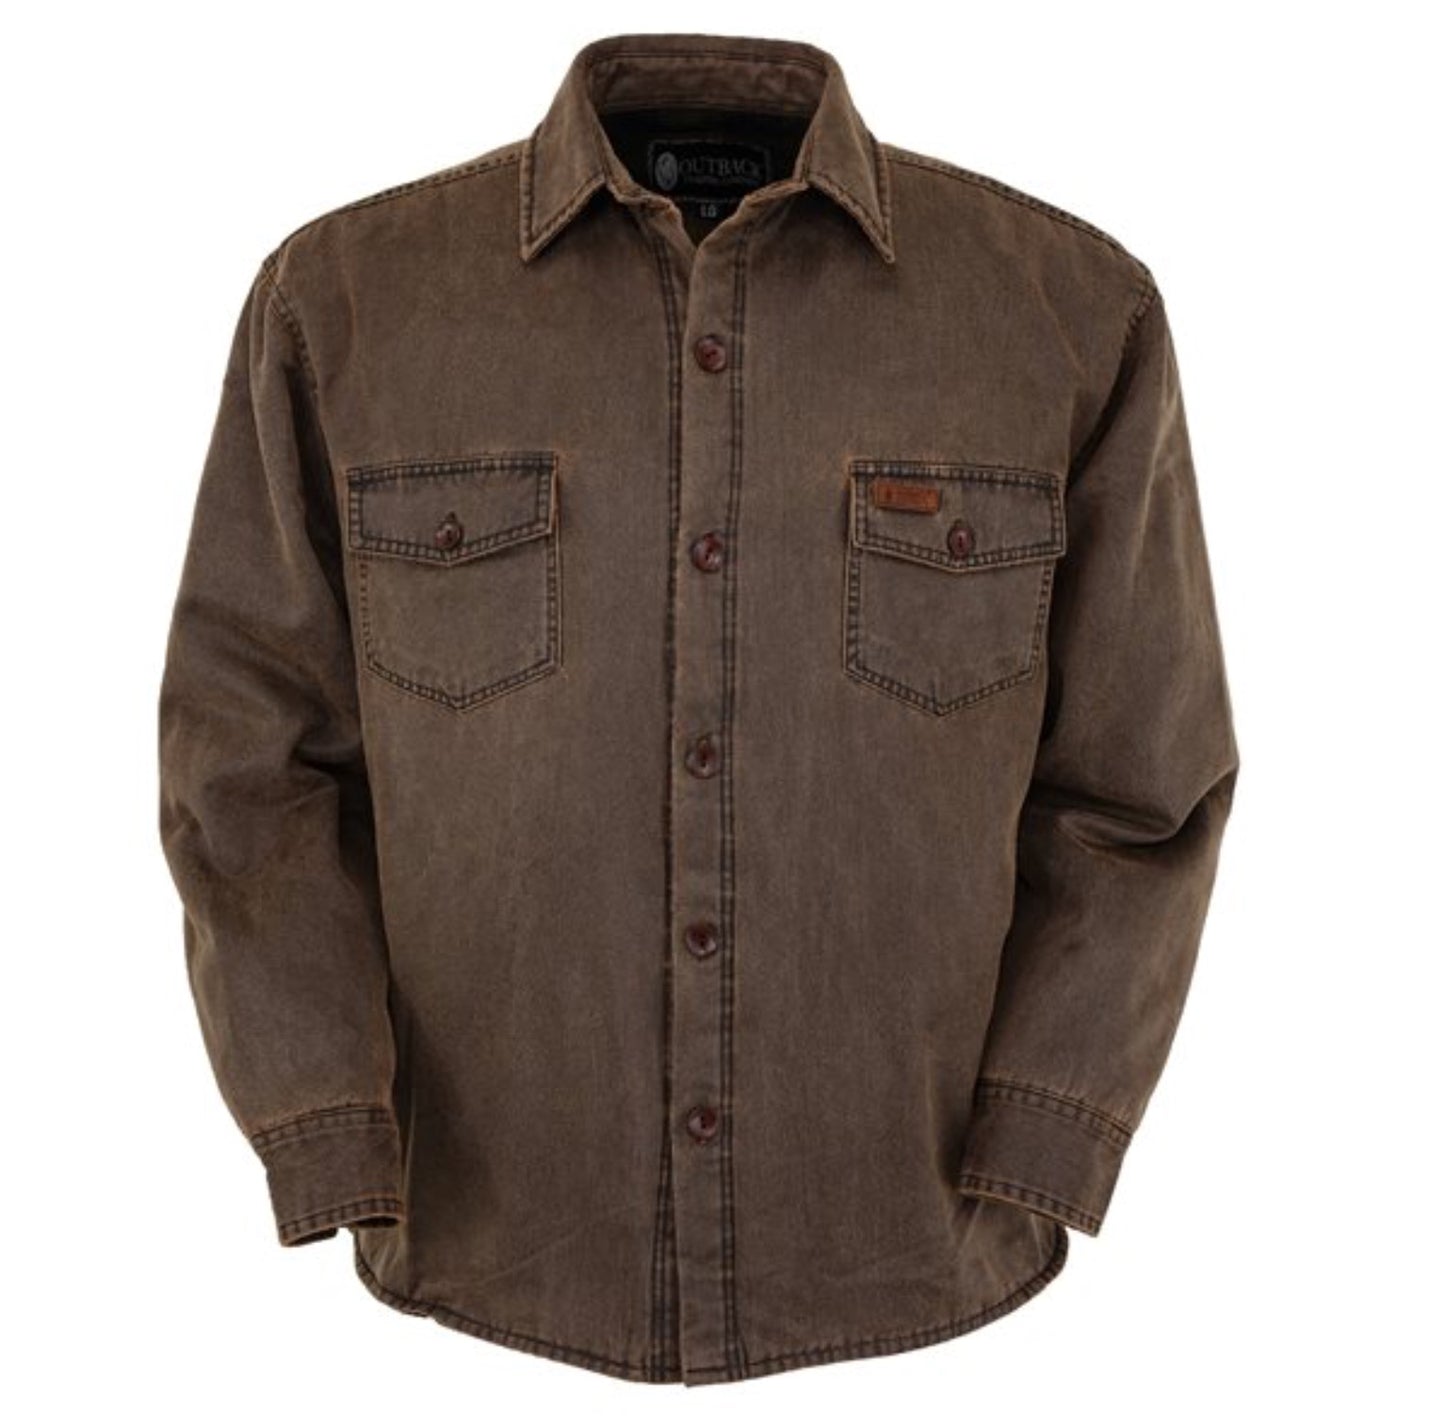 Outback Trading Co. Loxton Jacket Brown